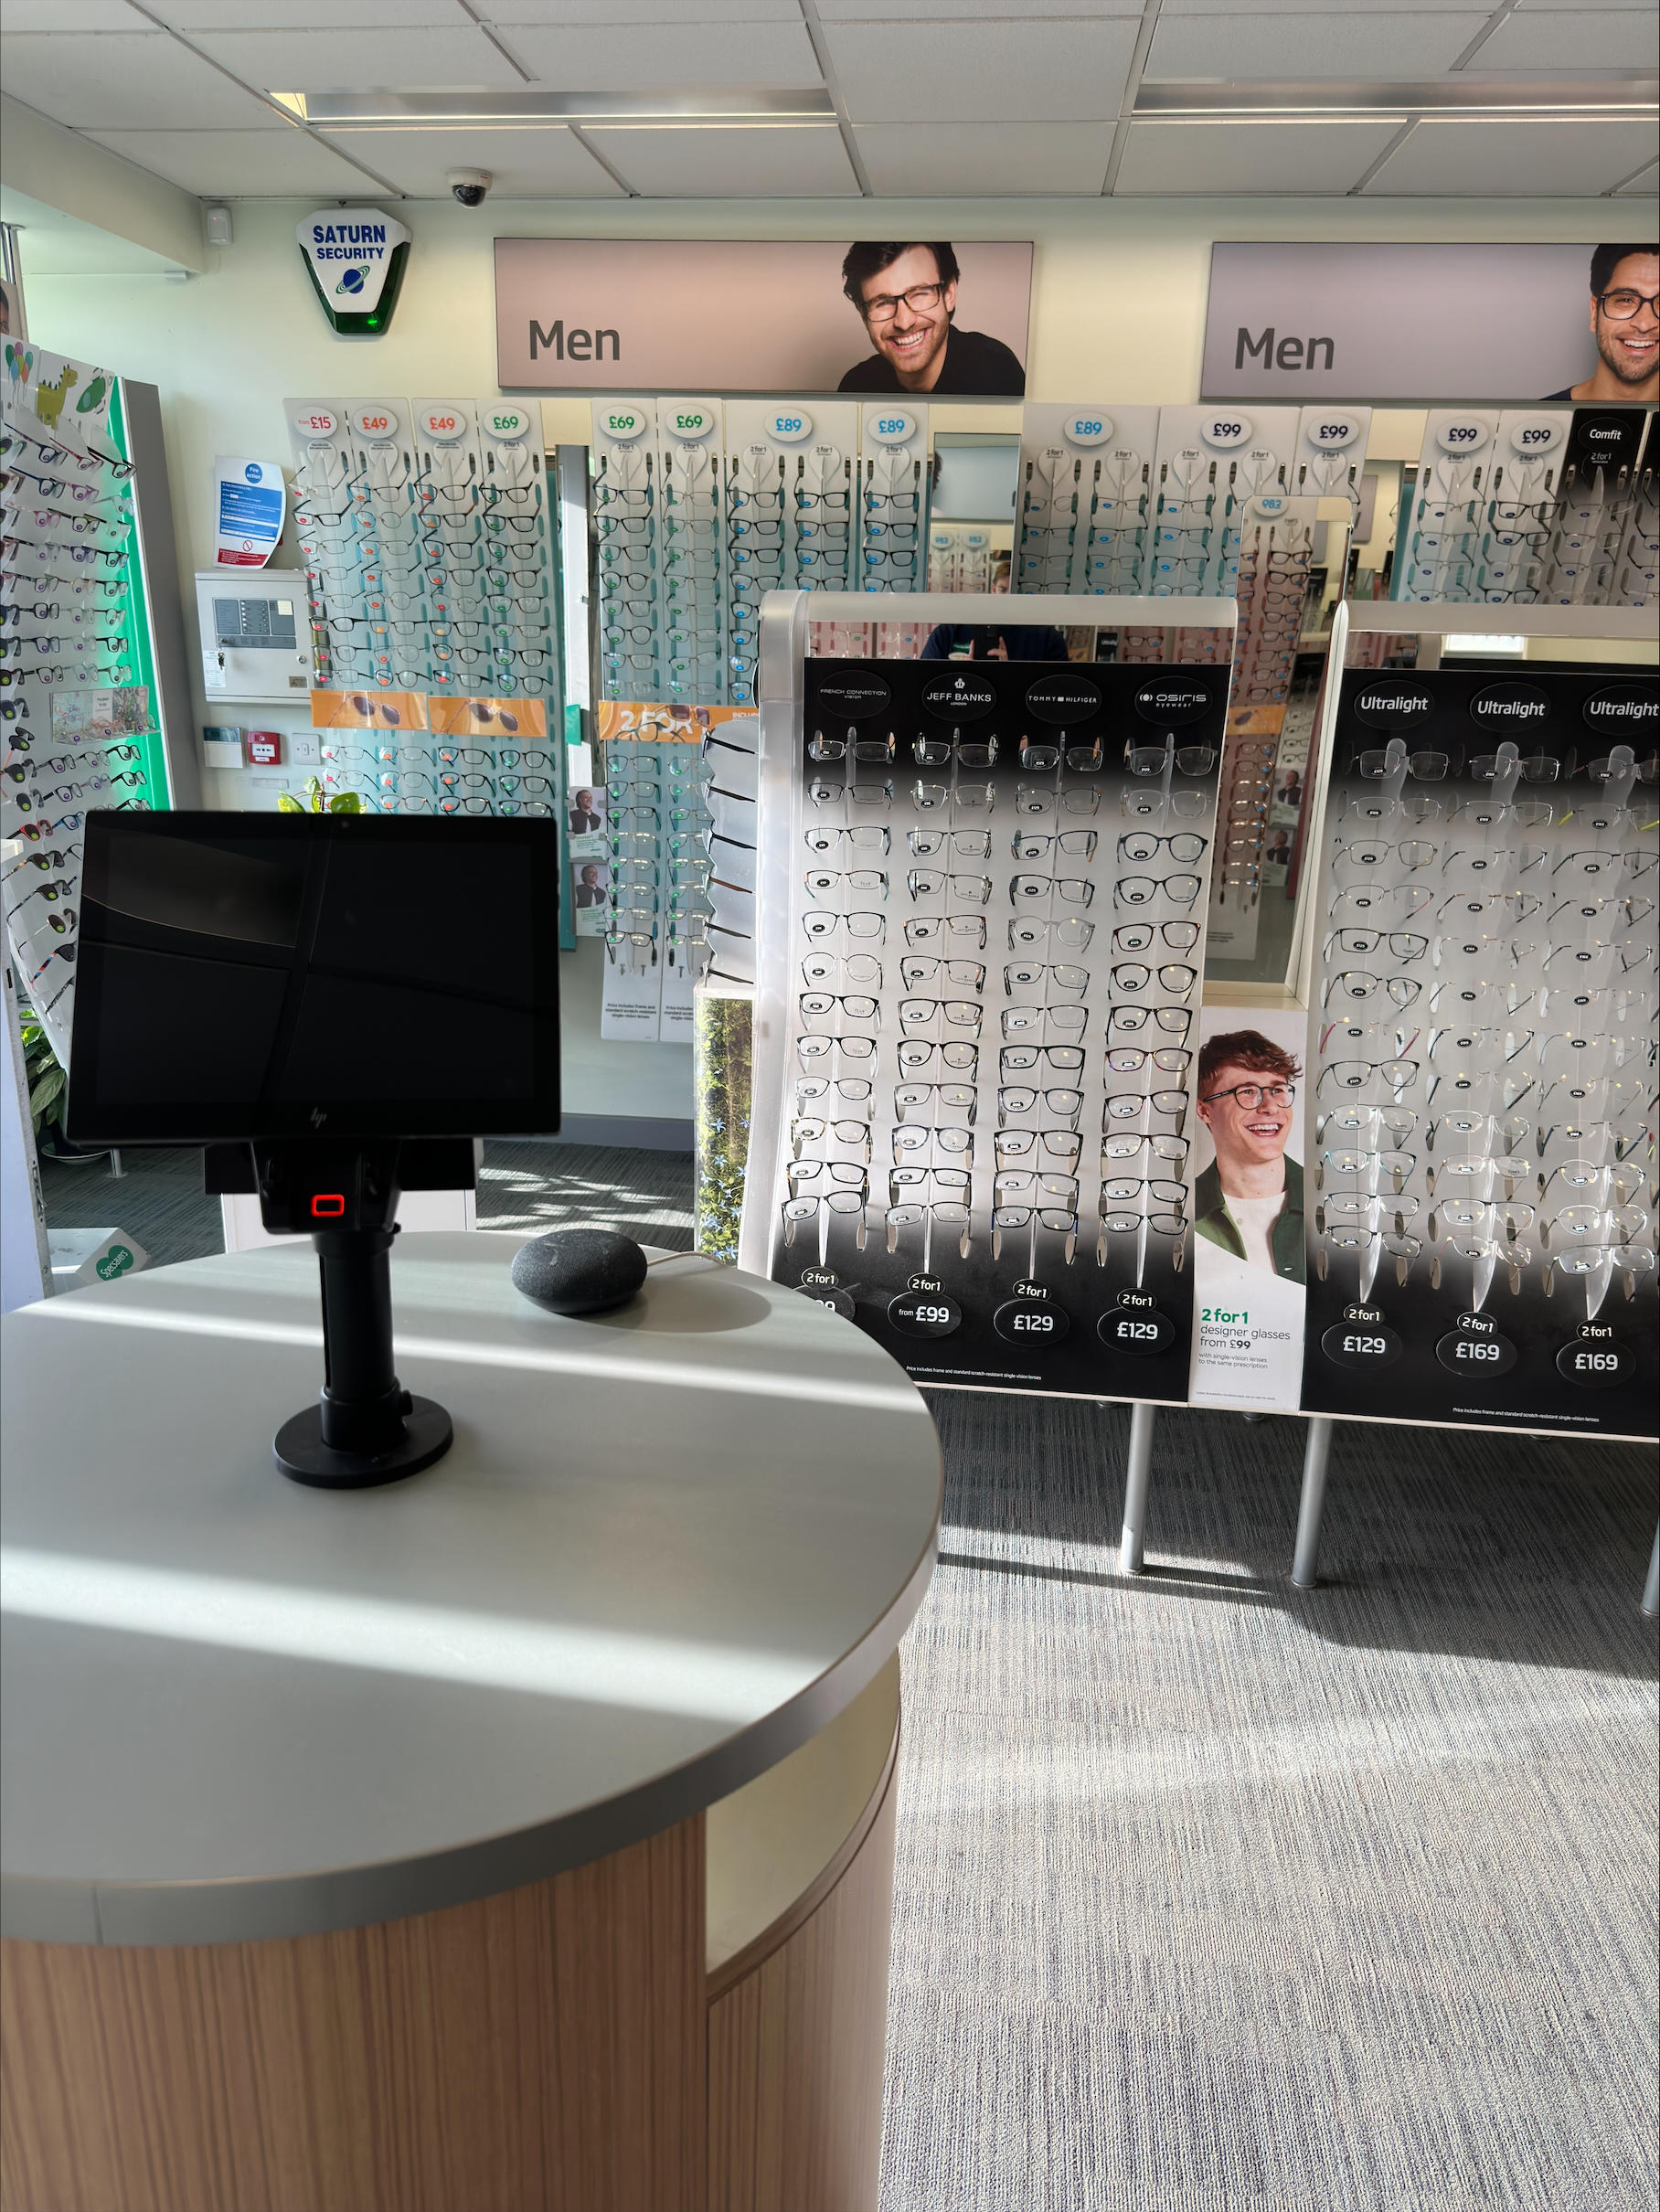 Specsavers Belle Vale Specsavers Opticians and Audiologists - Belle Vale Liverpool 01514 881600